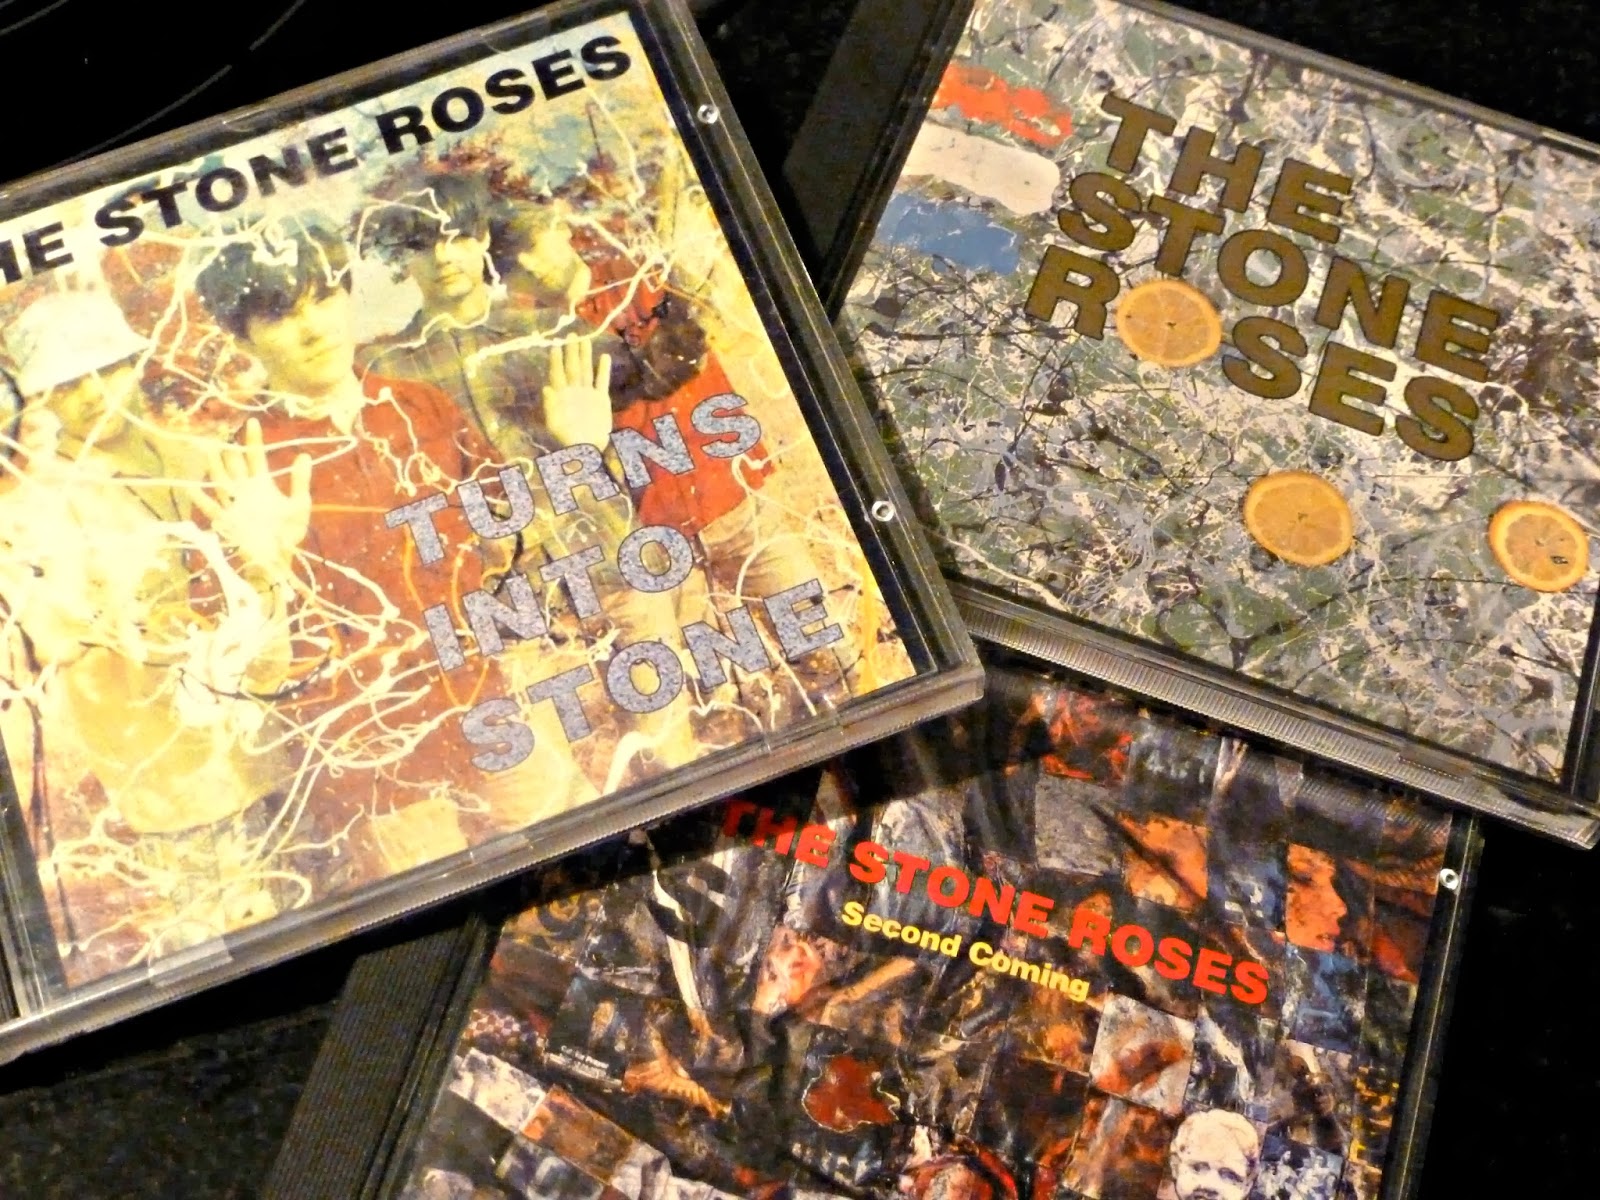 The Stone Roses - Fools Gold 415 at Discogs